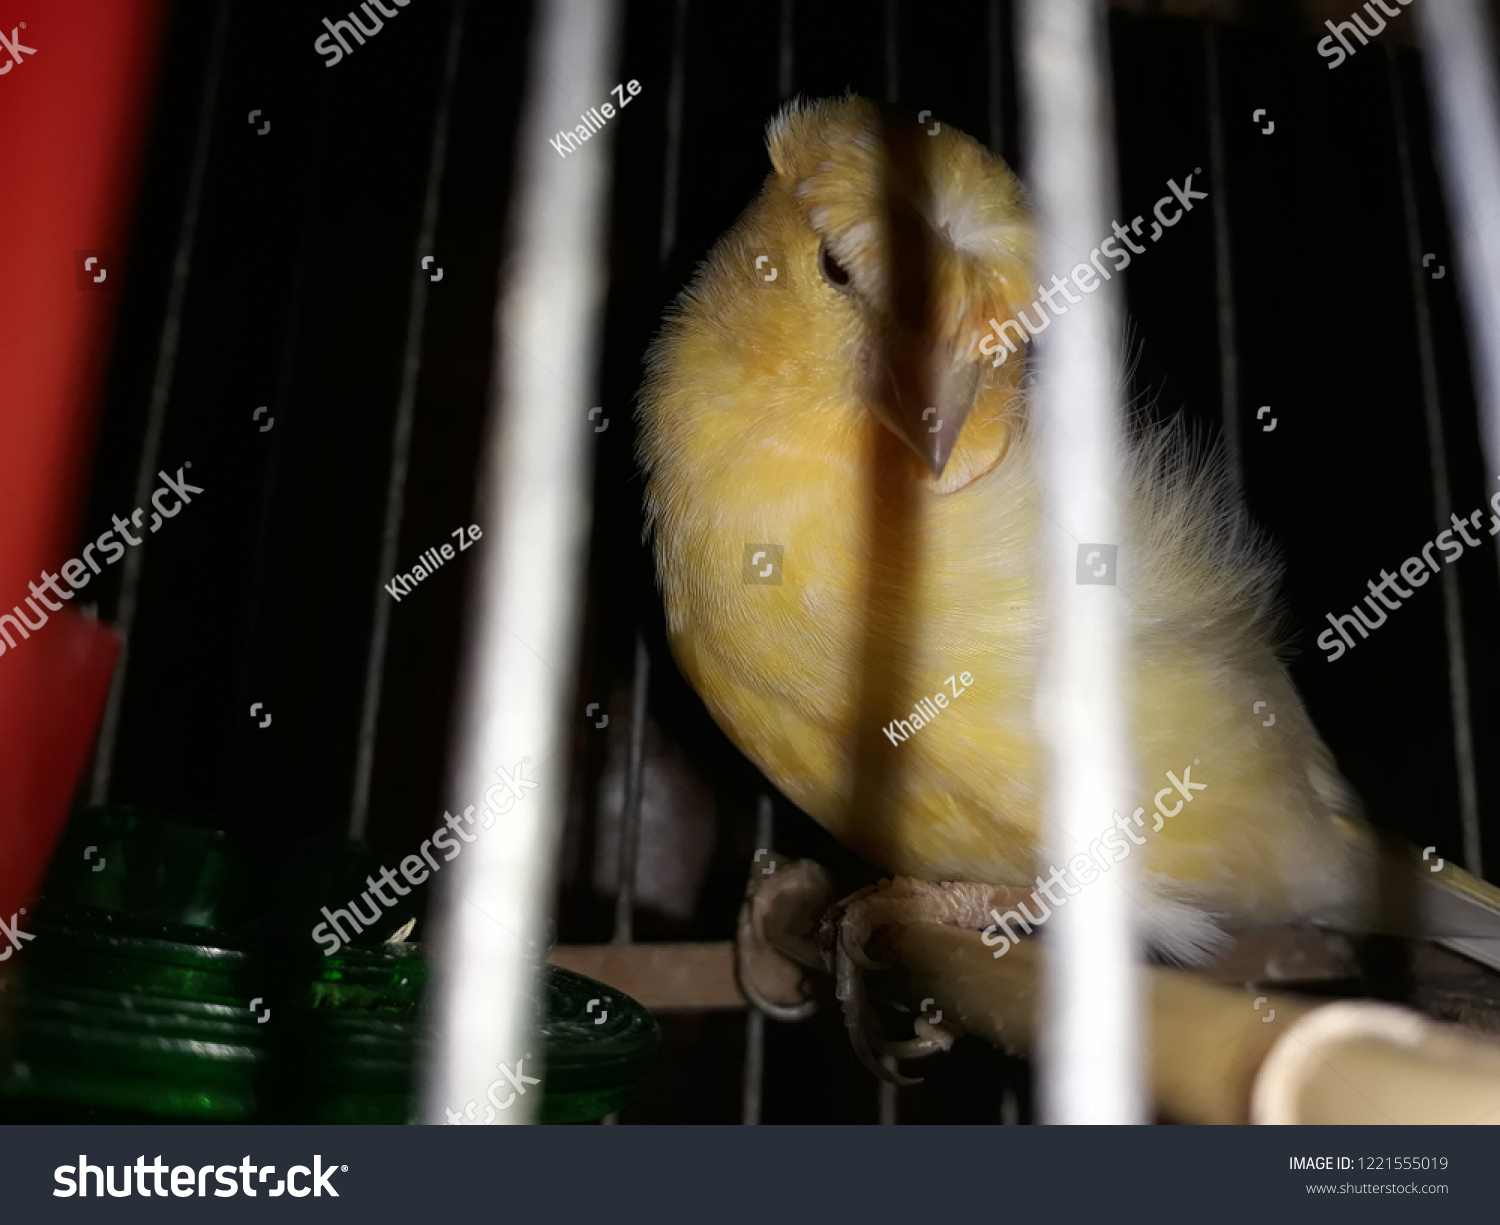 Canary is one of the most famous birds that avian birds seek to obtain. Canary pies are characterized by their yellow color, small size and beautiful voice. The Canary is named after the Canary Island #1221555019